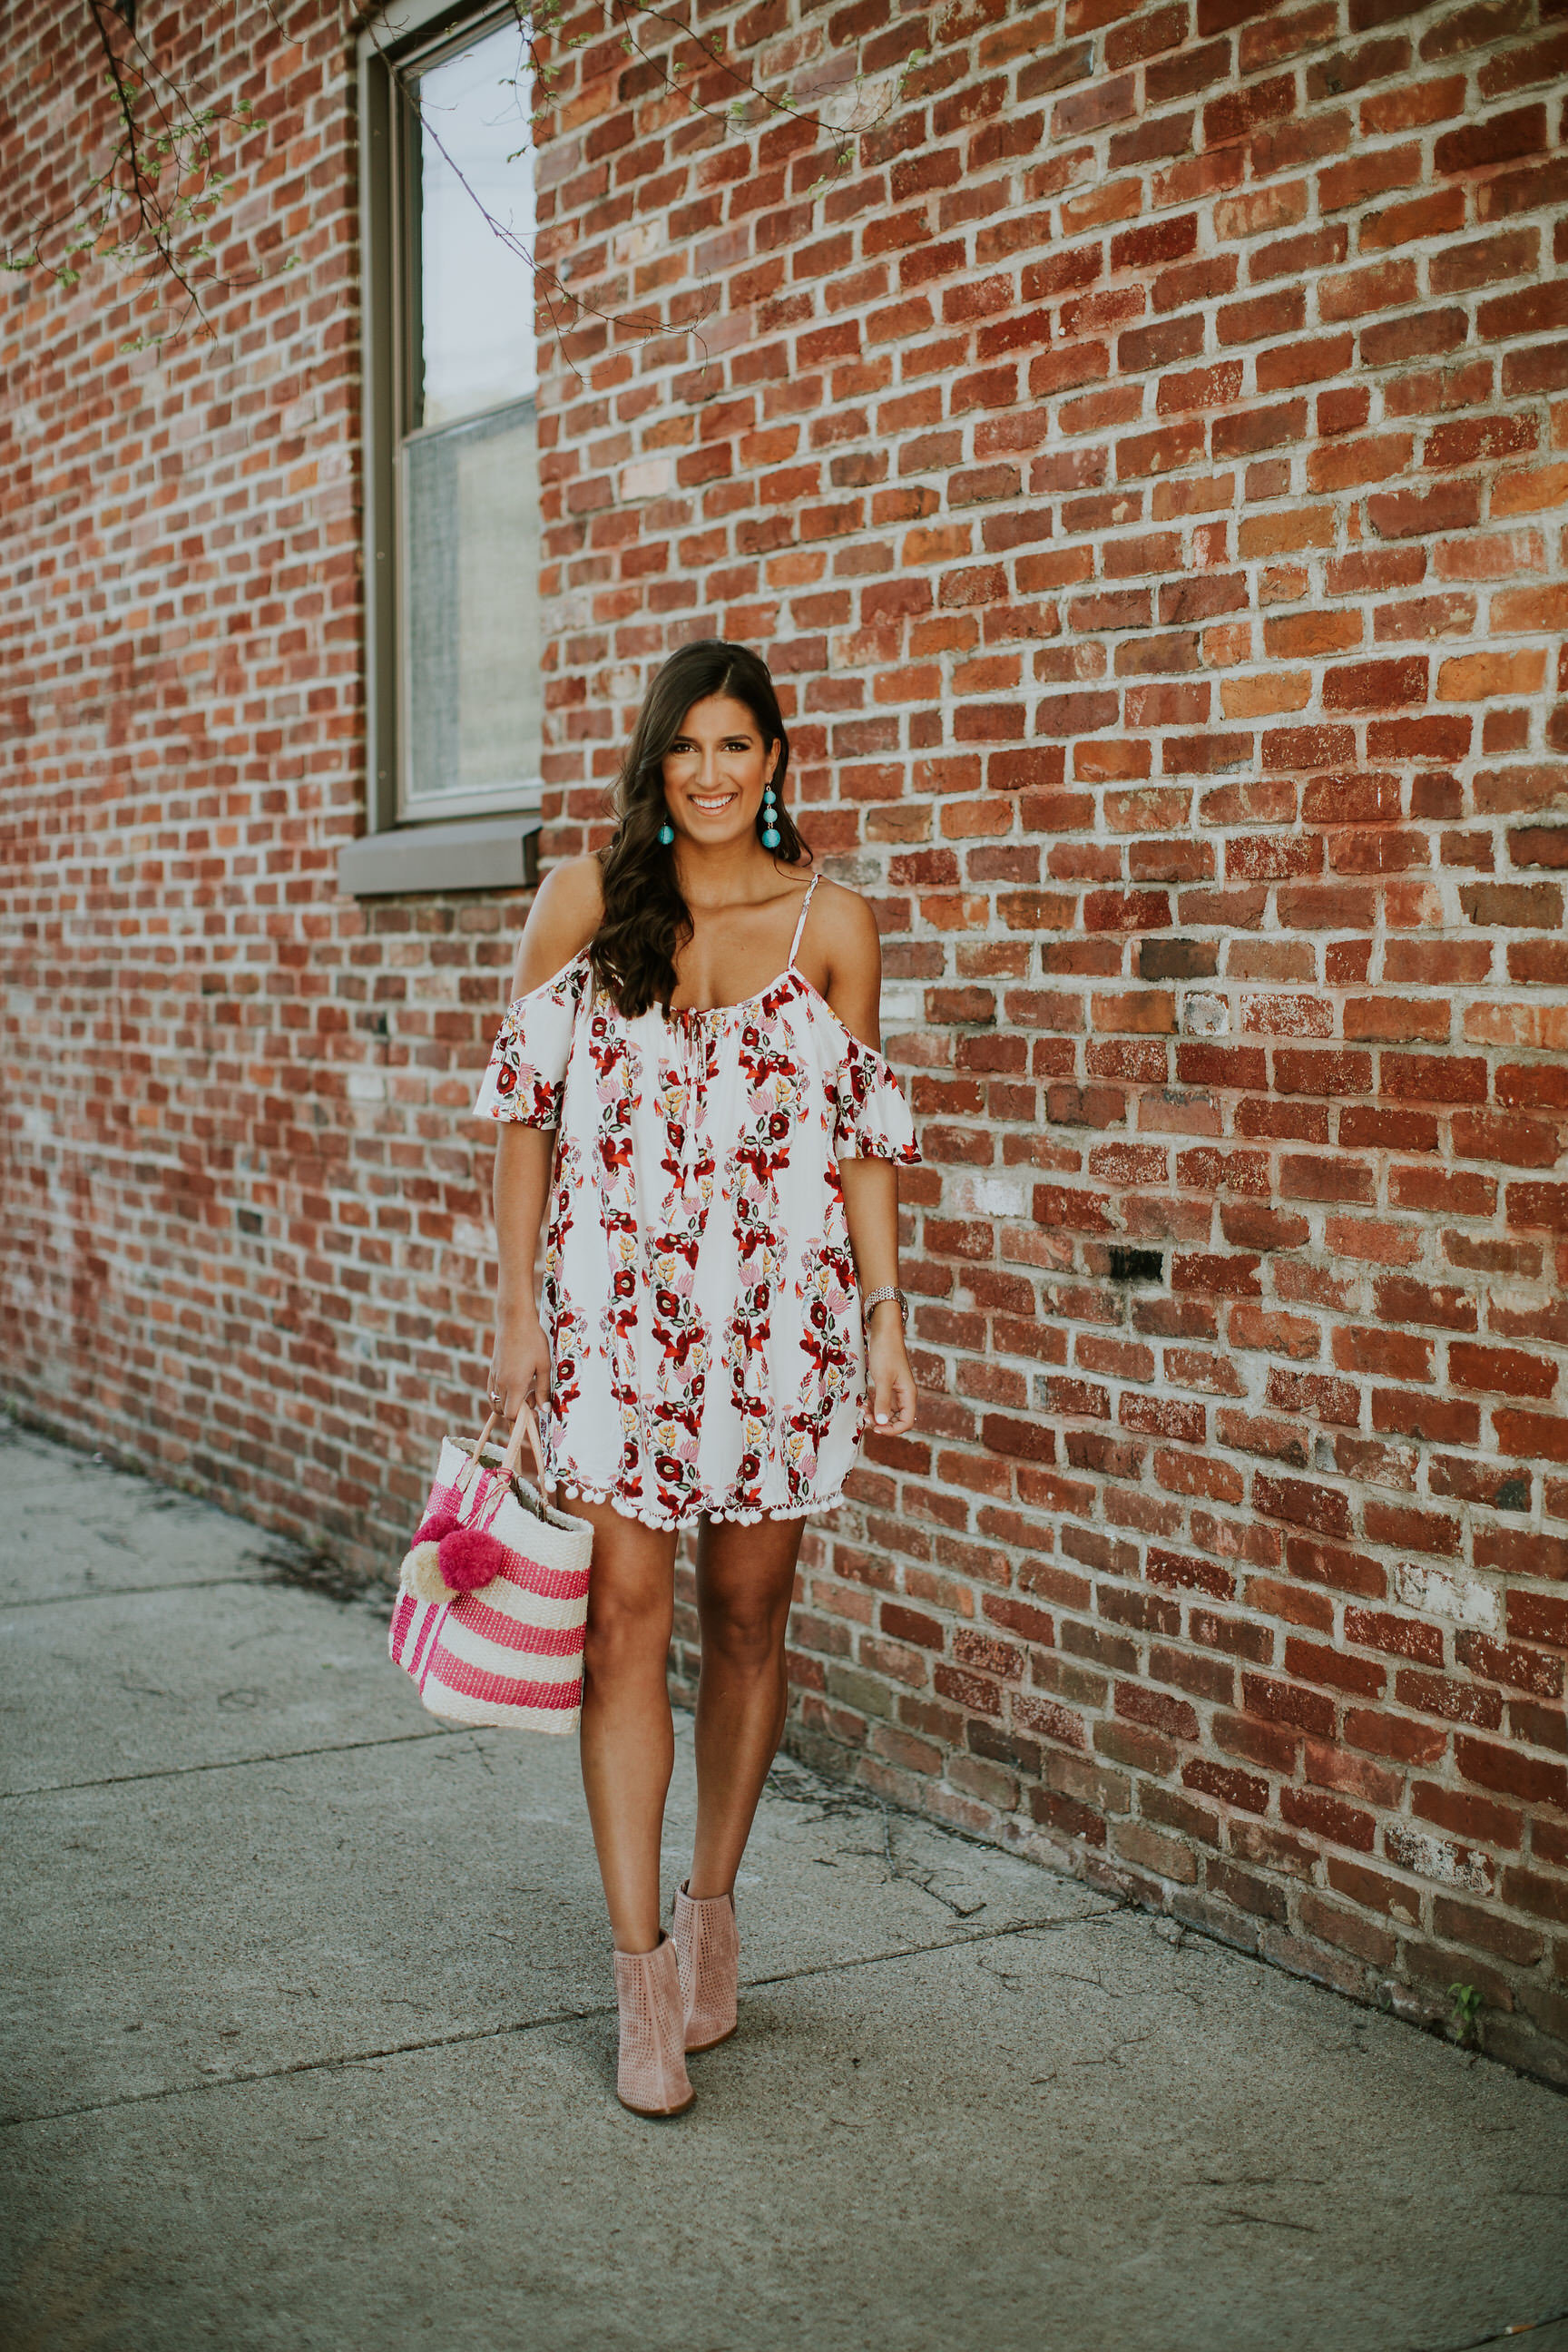 pom pom dress, cold shoulder dress, show me your mumu bonaroo dress, show me your mumu dresses, vacation dress, vacation fashion, vacation style, turquoise earrings, baublebar crispin drops, mar y sol collins tote, straw tote, straw beach tote, perforated booties, summer fashion, summer outfit ideas, southern fashion blogger, kentucky blogger // grace wainwright a southern drawl